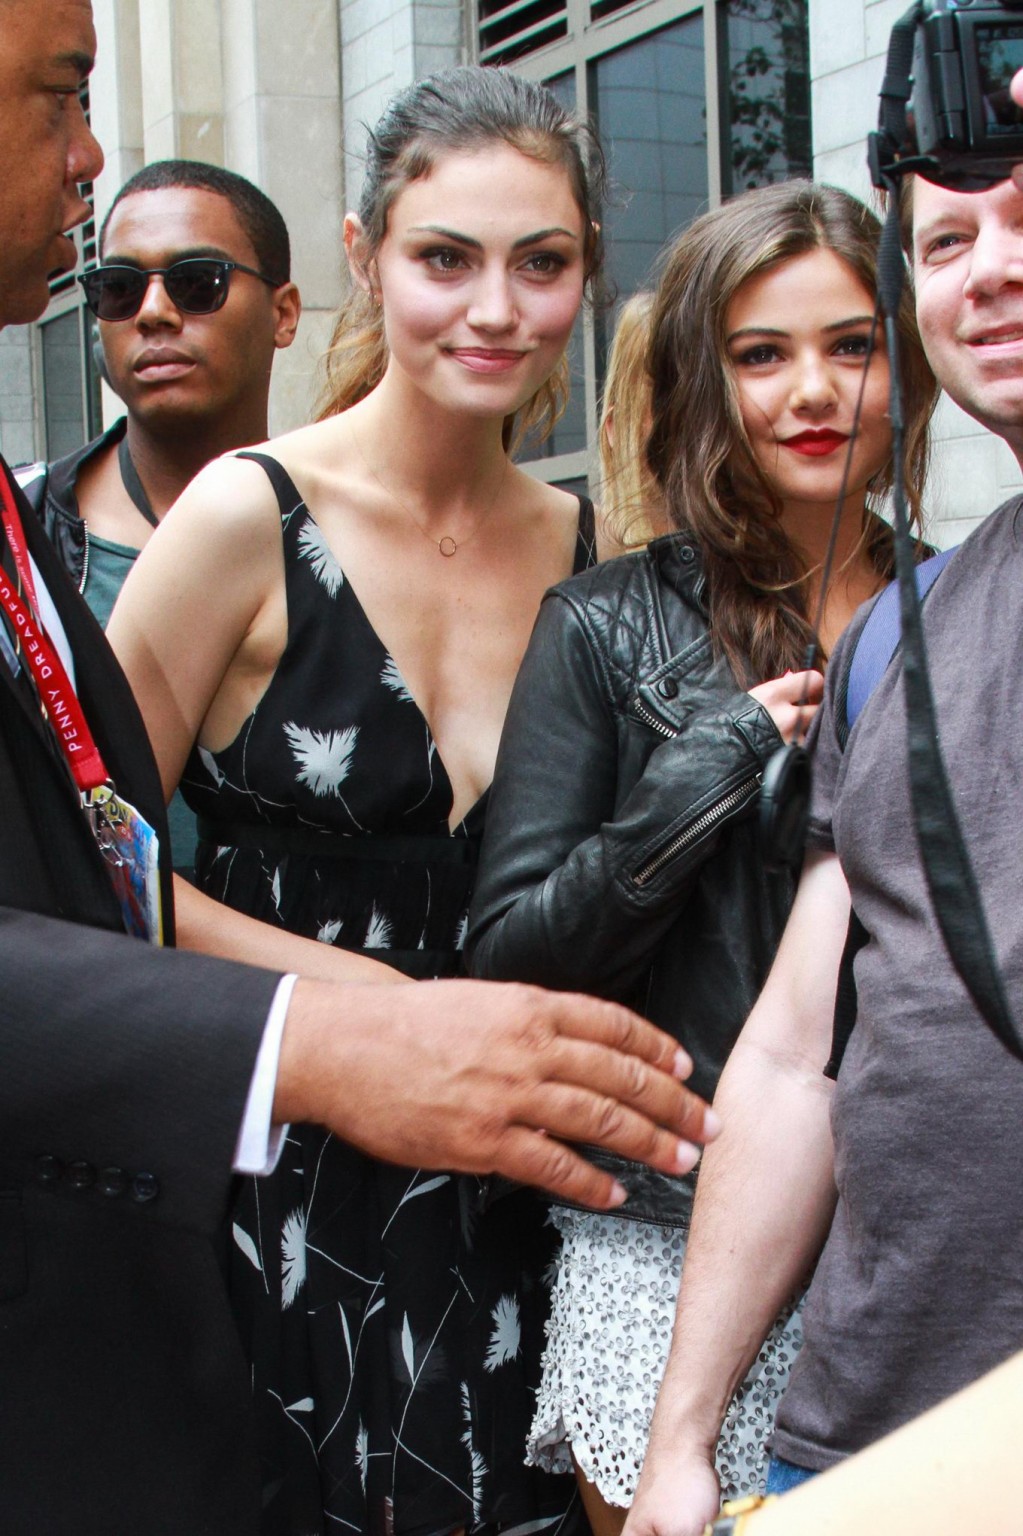 Phoebe Tonkin braless downblouse while loosing balance at Comic Con in San Diego #75189431